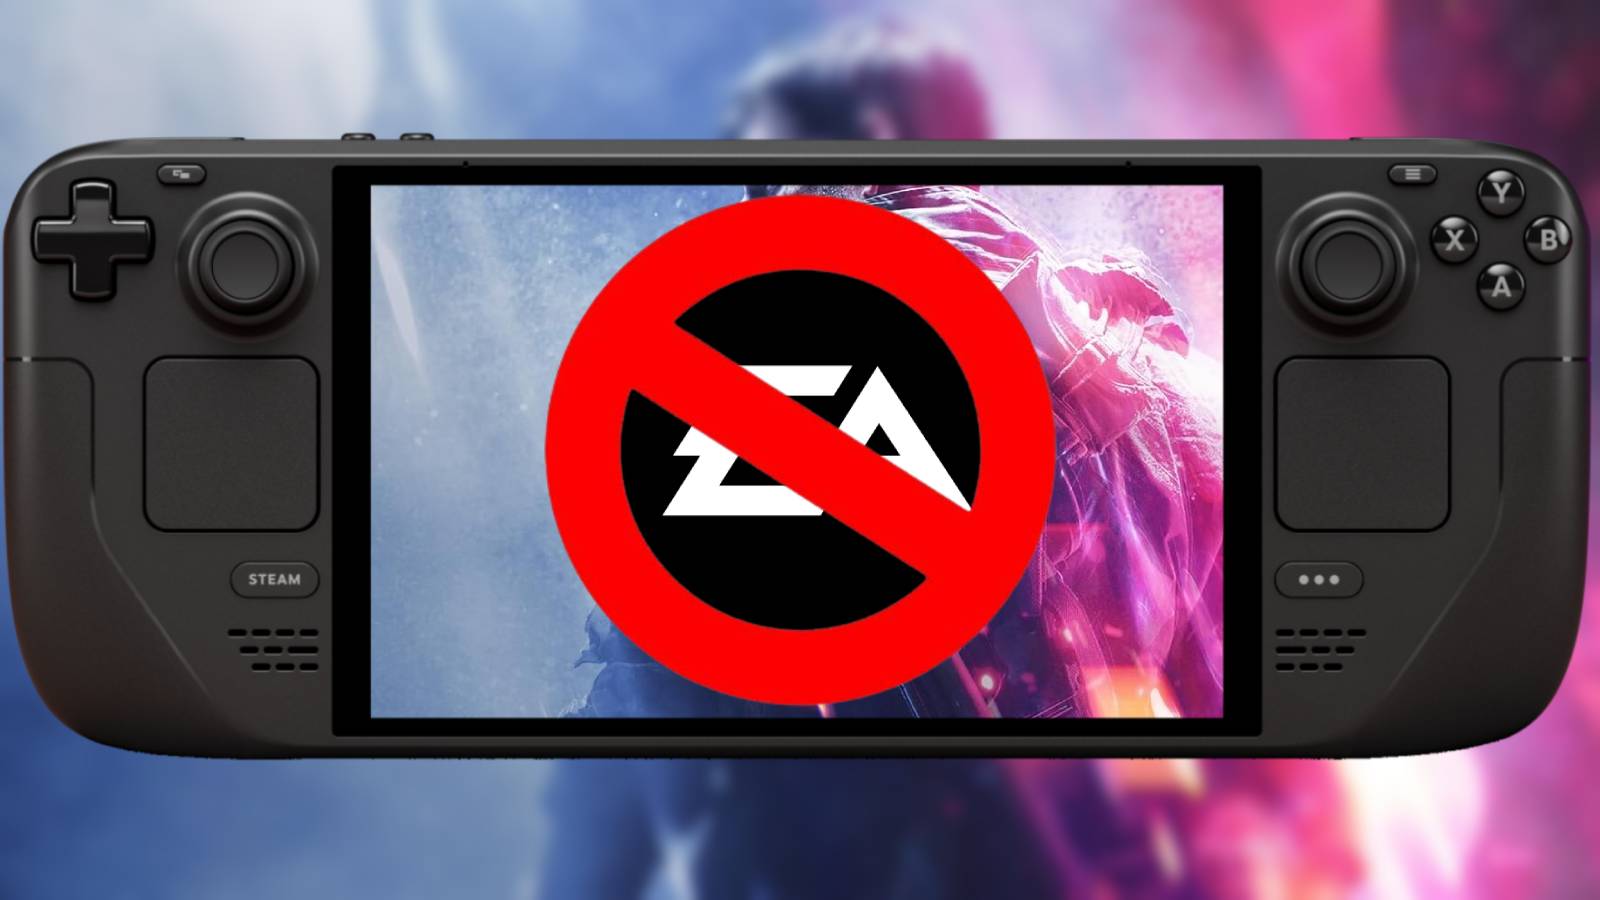 Image of the EA logo in a red, anti-smoking icon, with the Battlefield V art in the background on the screen of a Steam Deck.